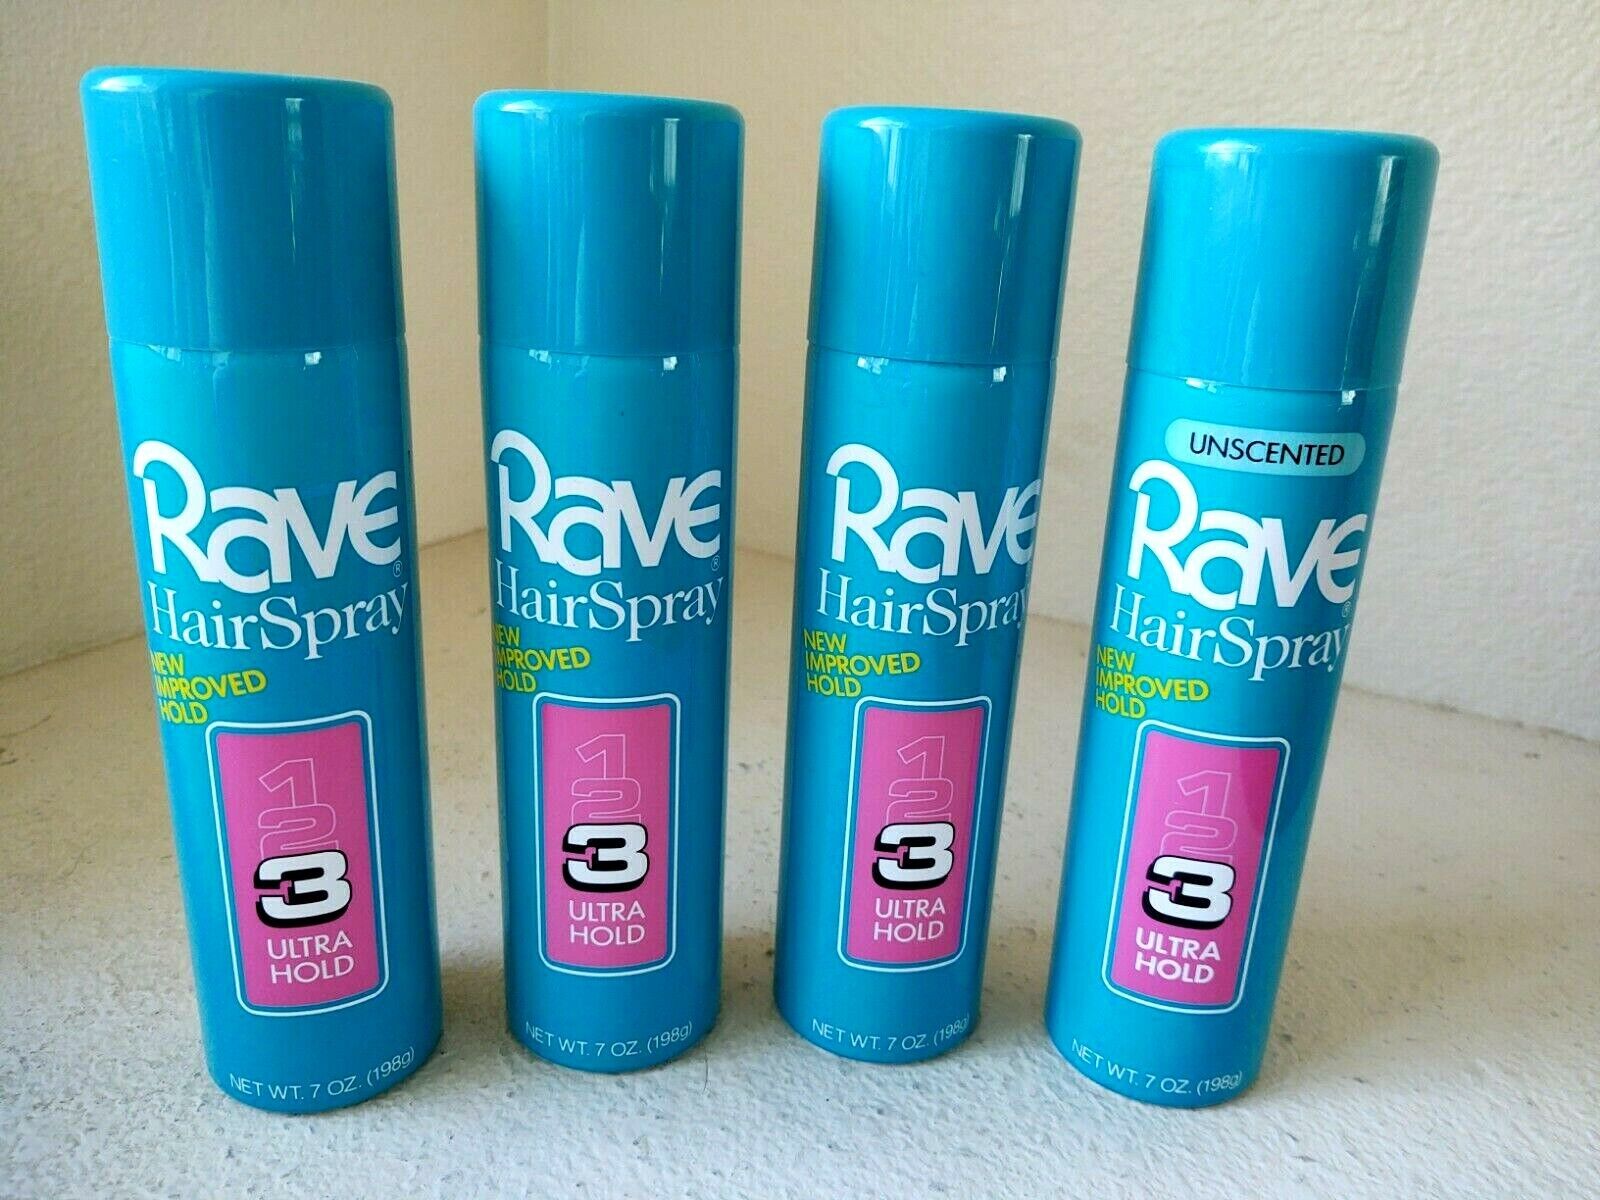 Lot/4 VTG Rave Ultra Hold 3 Hairspray 7oz Can 1 Unscented New Improved Hold PROP